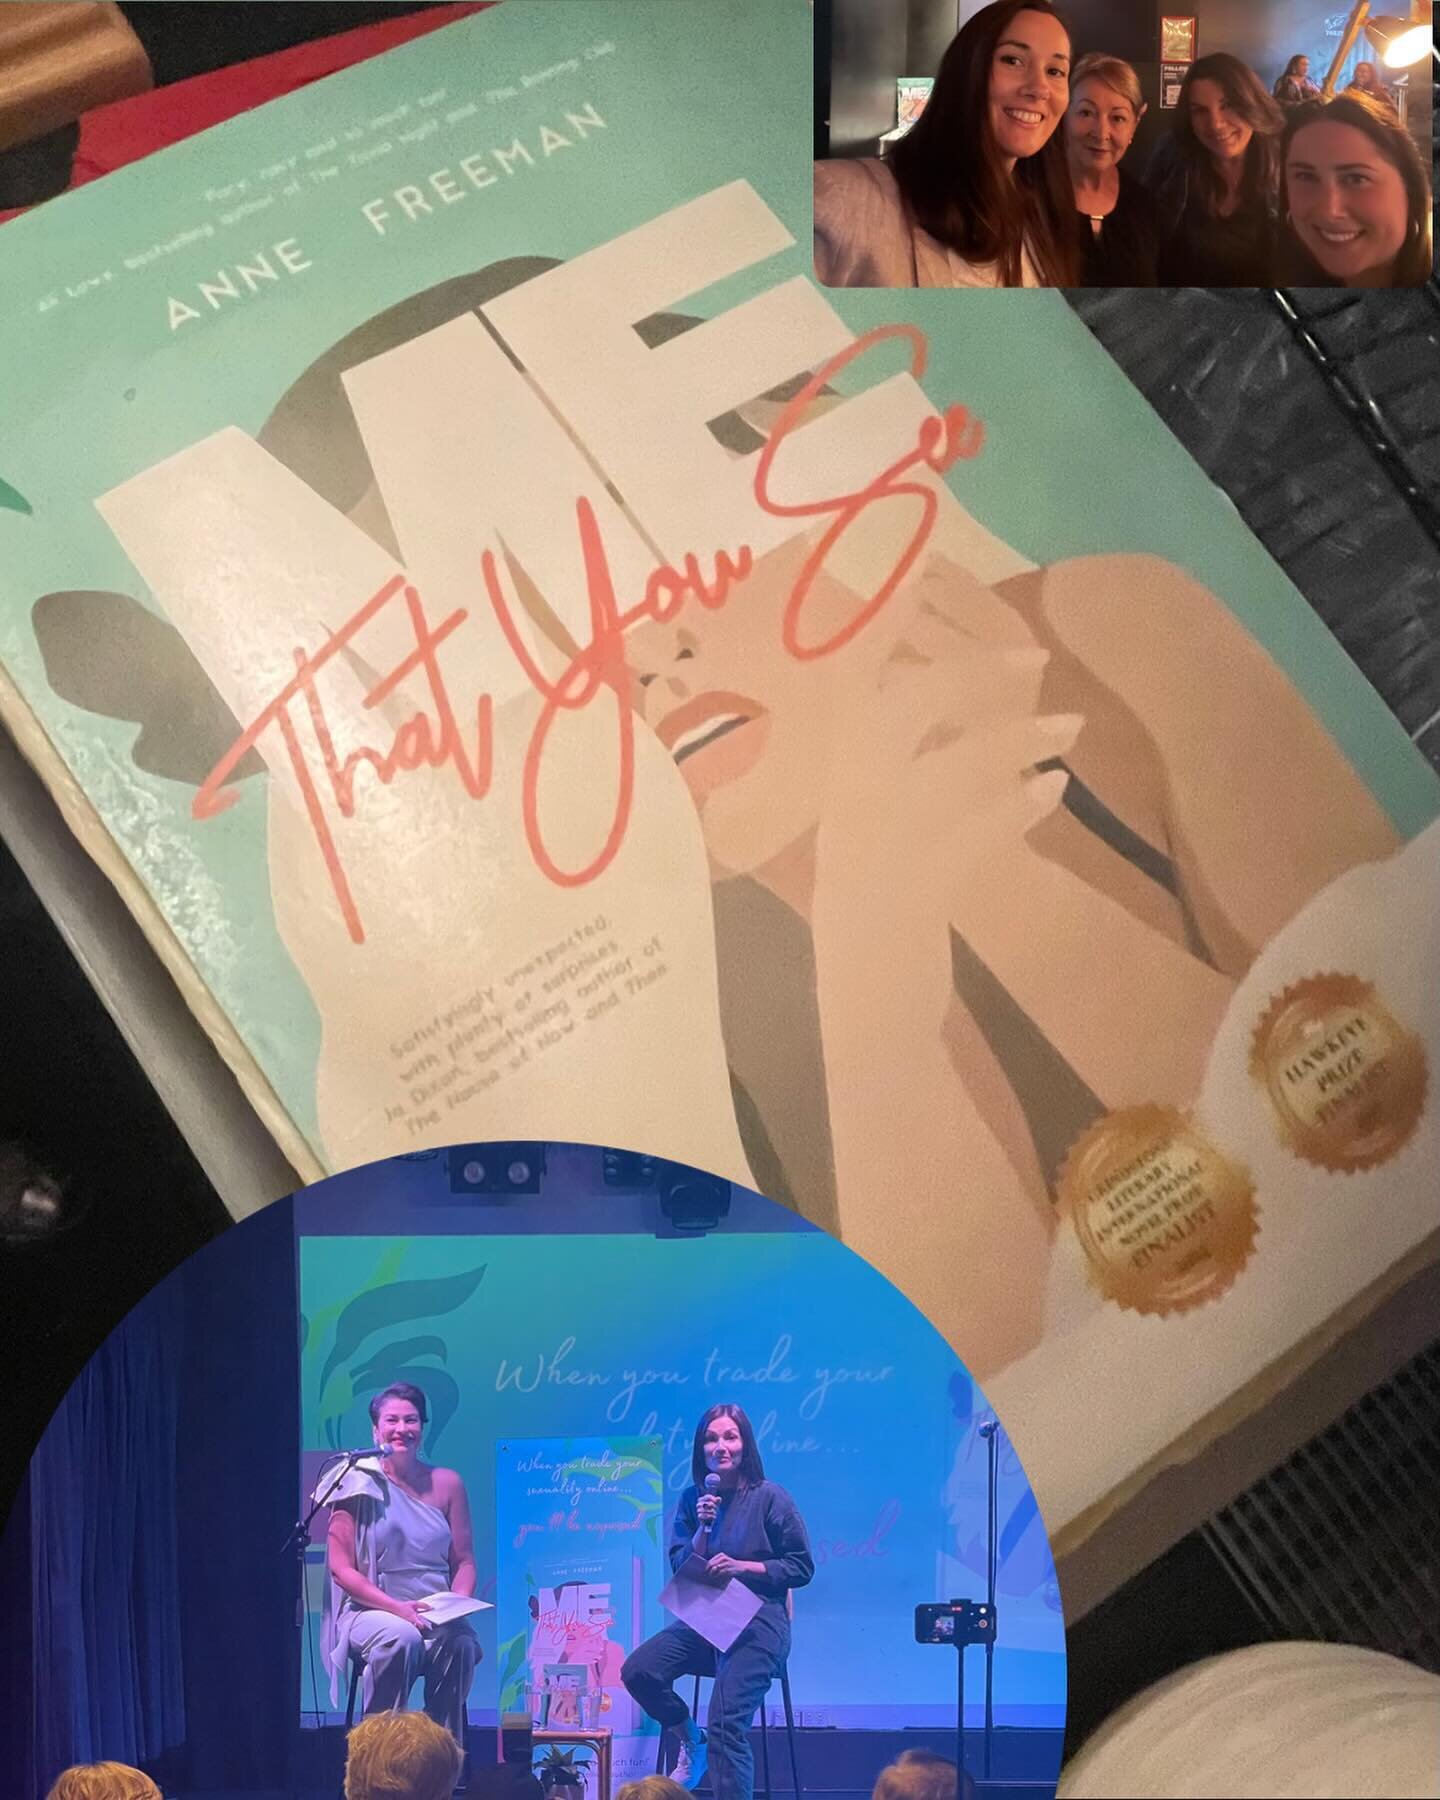 Yesterday @annefreemanwrites launched her second novel #MeThatYouSee at the @northcotesocialclub and the atmosphere was electric!

Starting with a glass of bubbles, we were treated to the musical talents of @nicoleshenko before a Q&amp;A, lots of wri